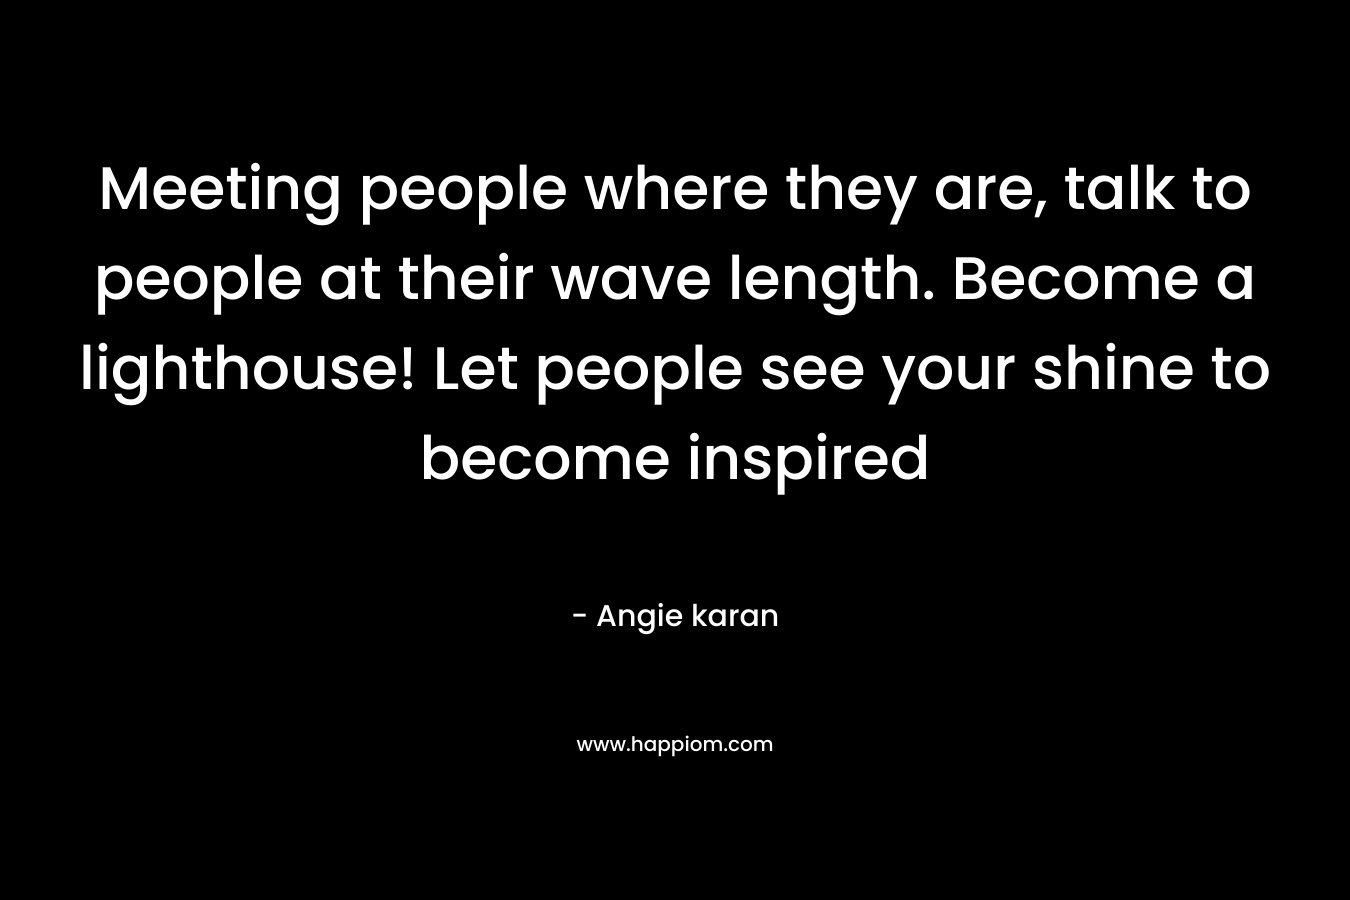 Meeting people where they are, talk to people at their wave length. Become a lighthouse! Let people see your shine to become inspired